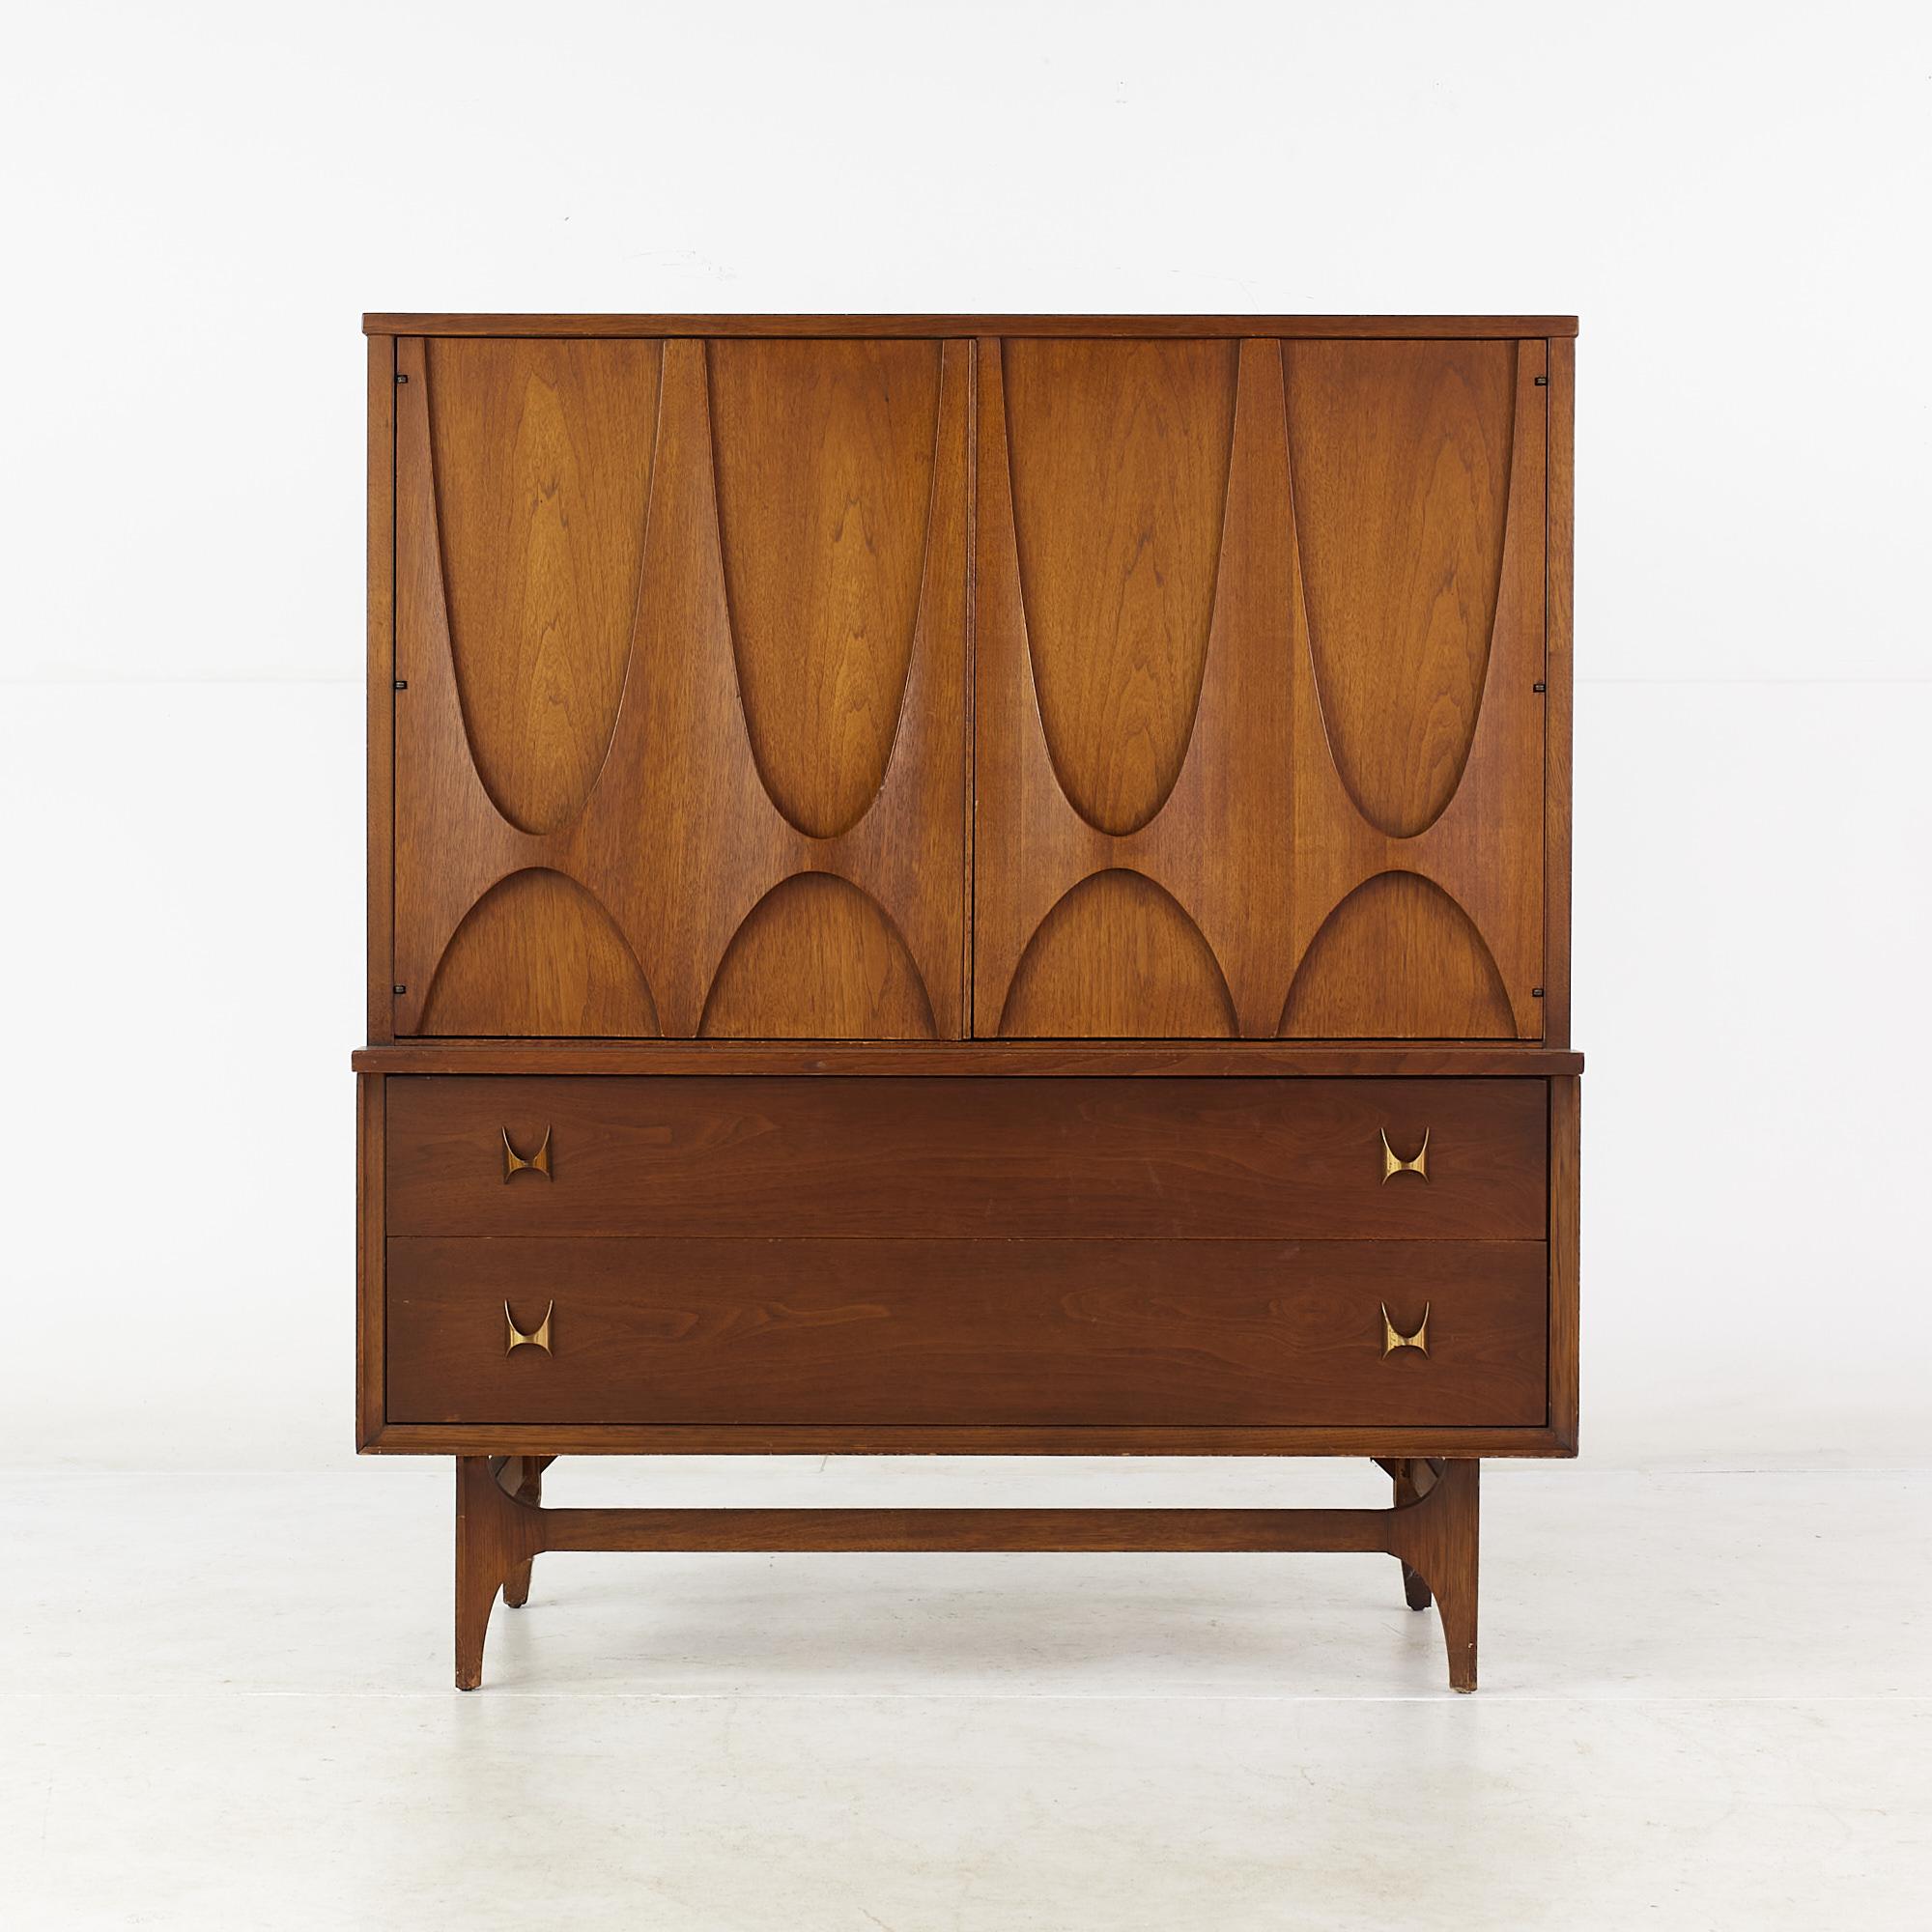 Broyhill Brasilia midcentury walnut gentlemans chest

This chest measures: 44 wide x 19 deep x 50 inches high

All pieces of furniture can be had in what we call restored vintage condition. That means the piece is restored upon purchase so it’s